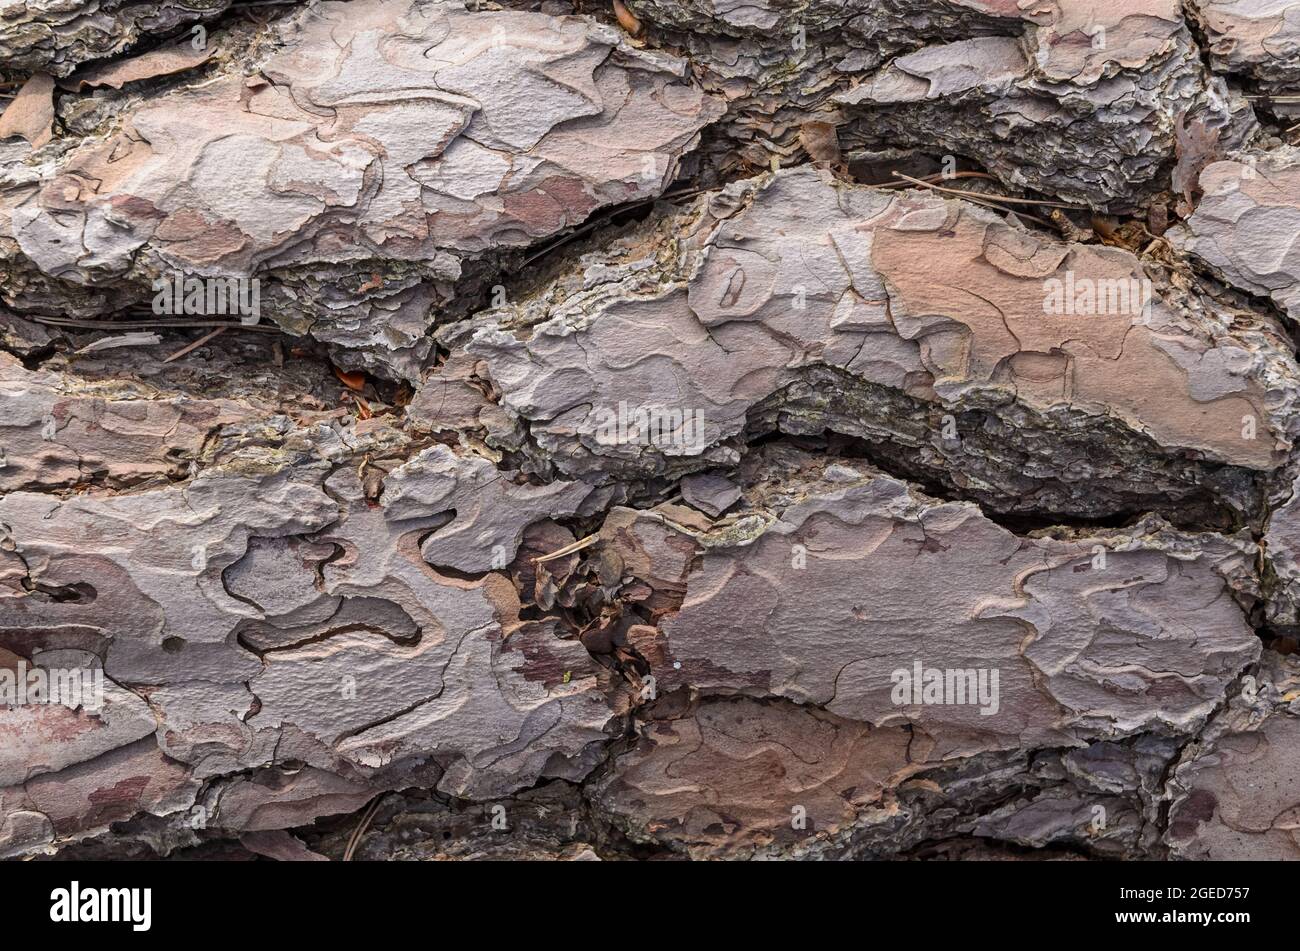 Close-up view of brown weathered outer pine tree bark (Conifer, Pinus, Pinoideae) with different layers and texture, abstract natural background Stock Photo